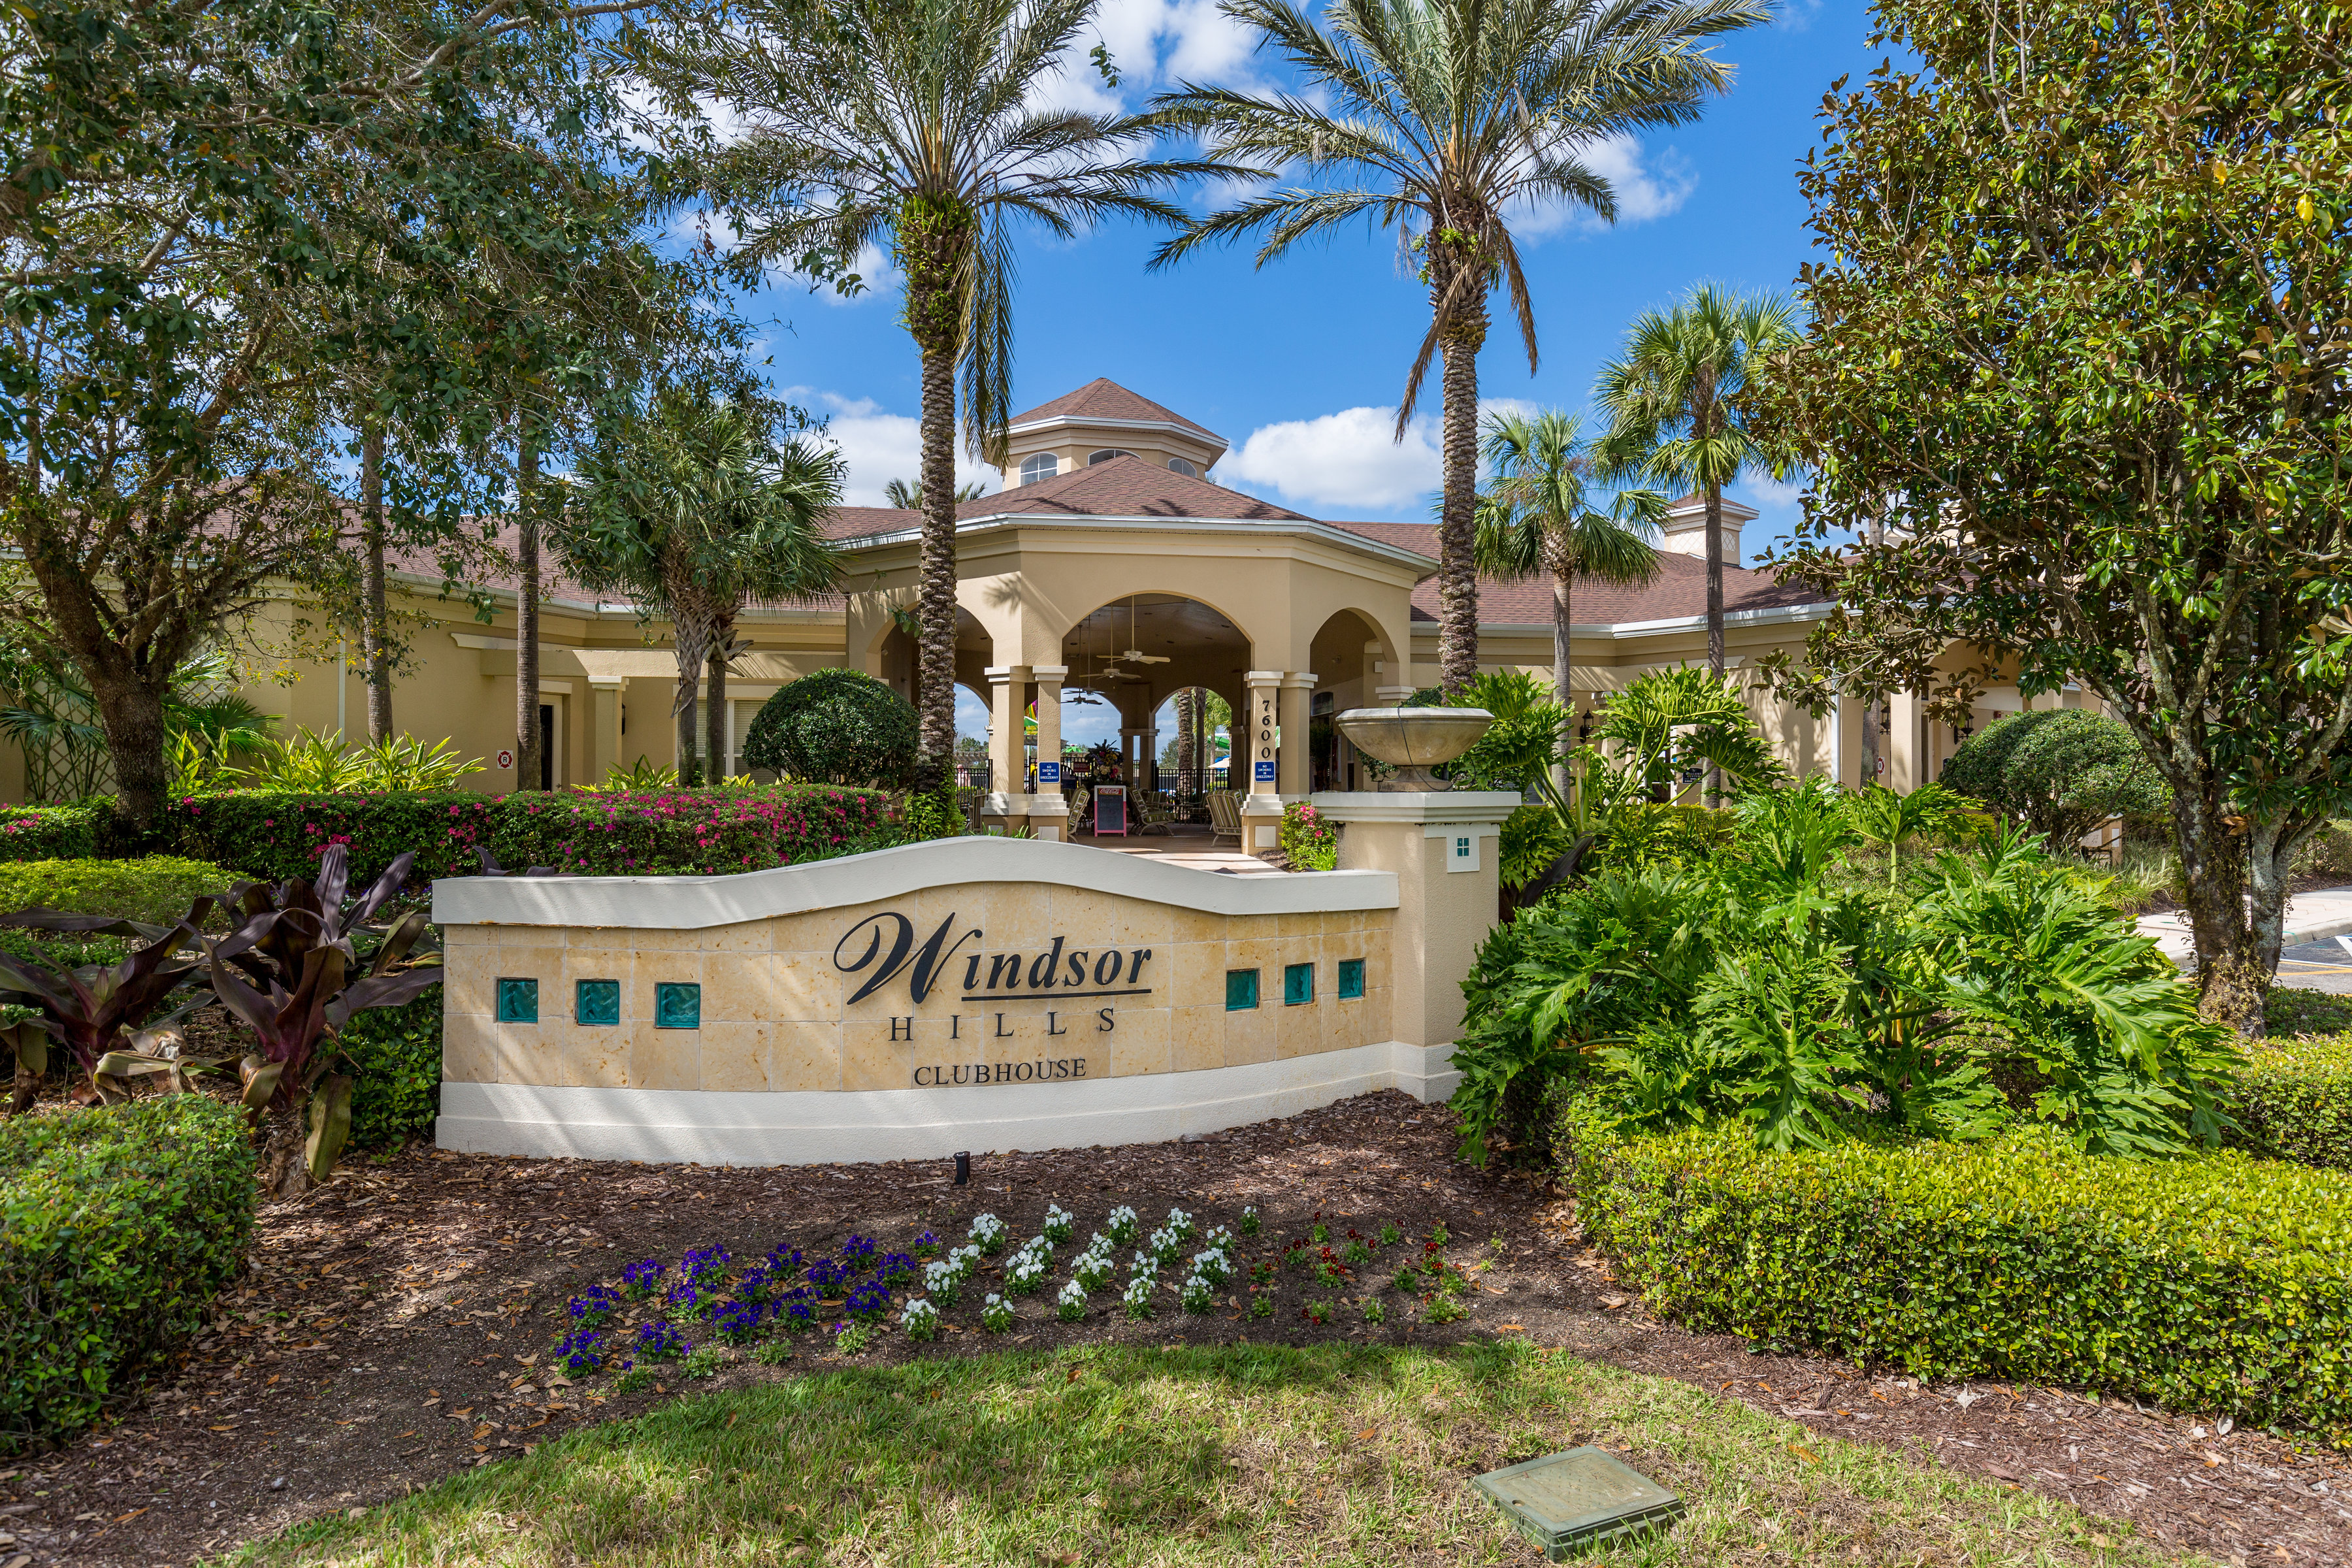 Stay at our Windsor Hills Vacation Rentals   Orlando Vacation ...